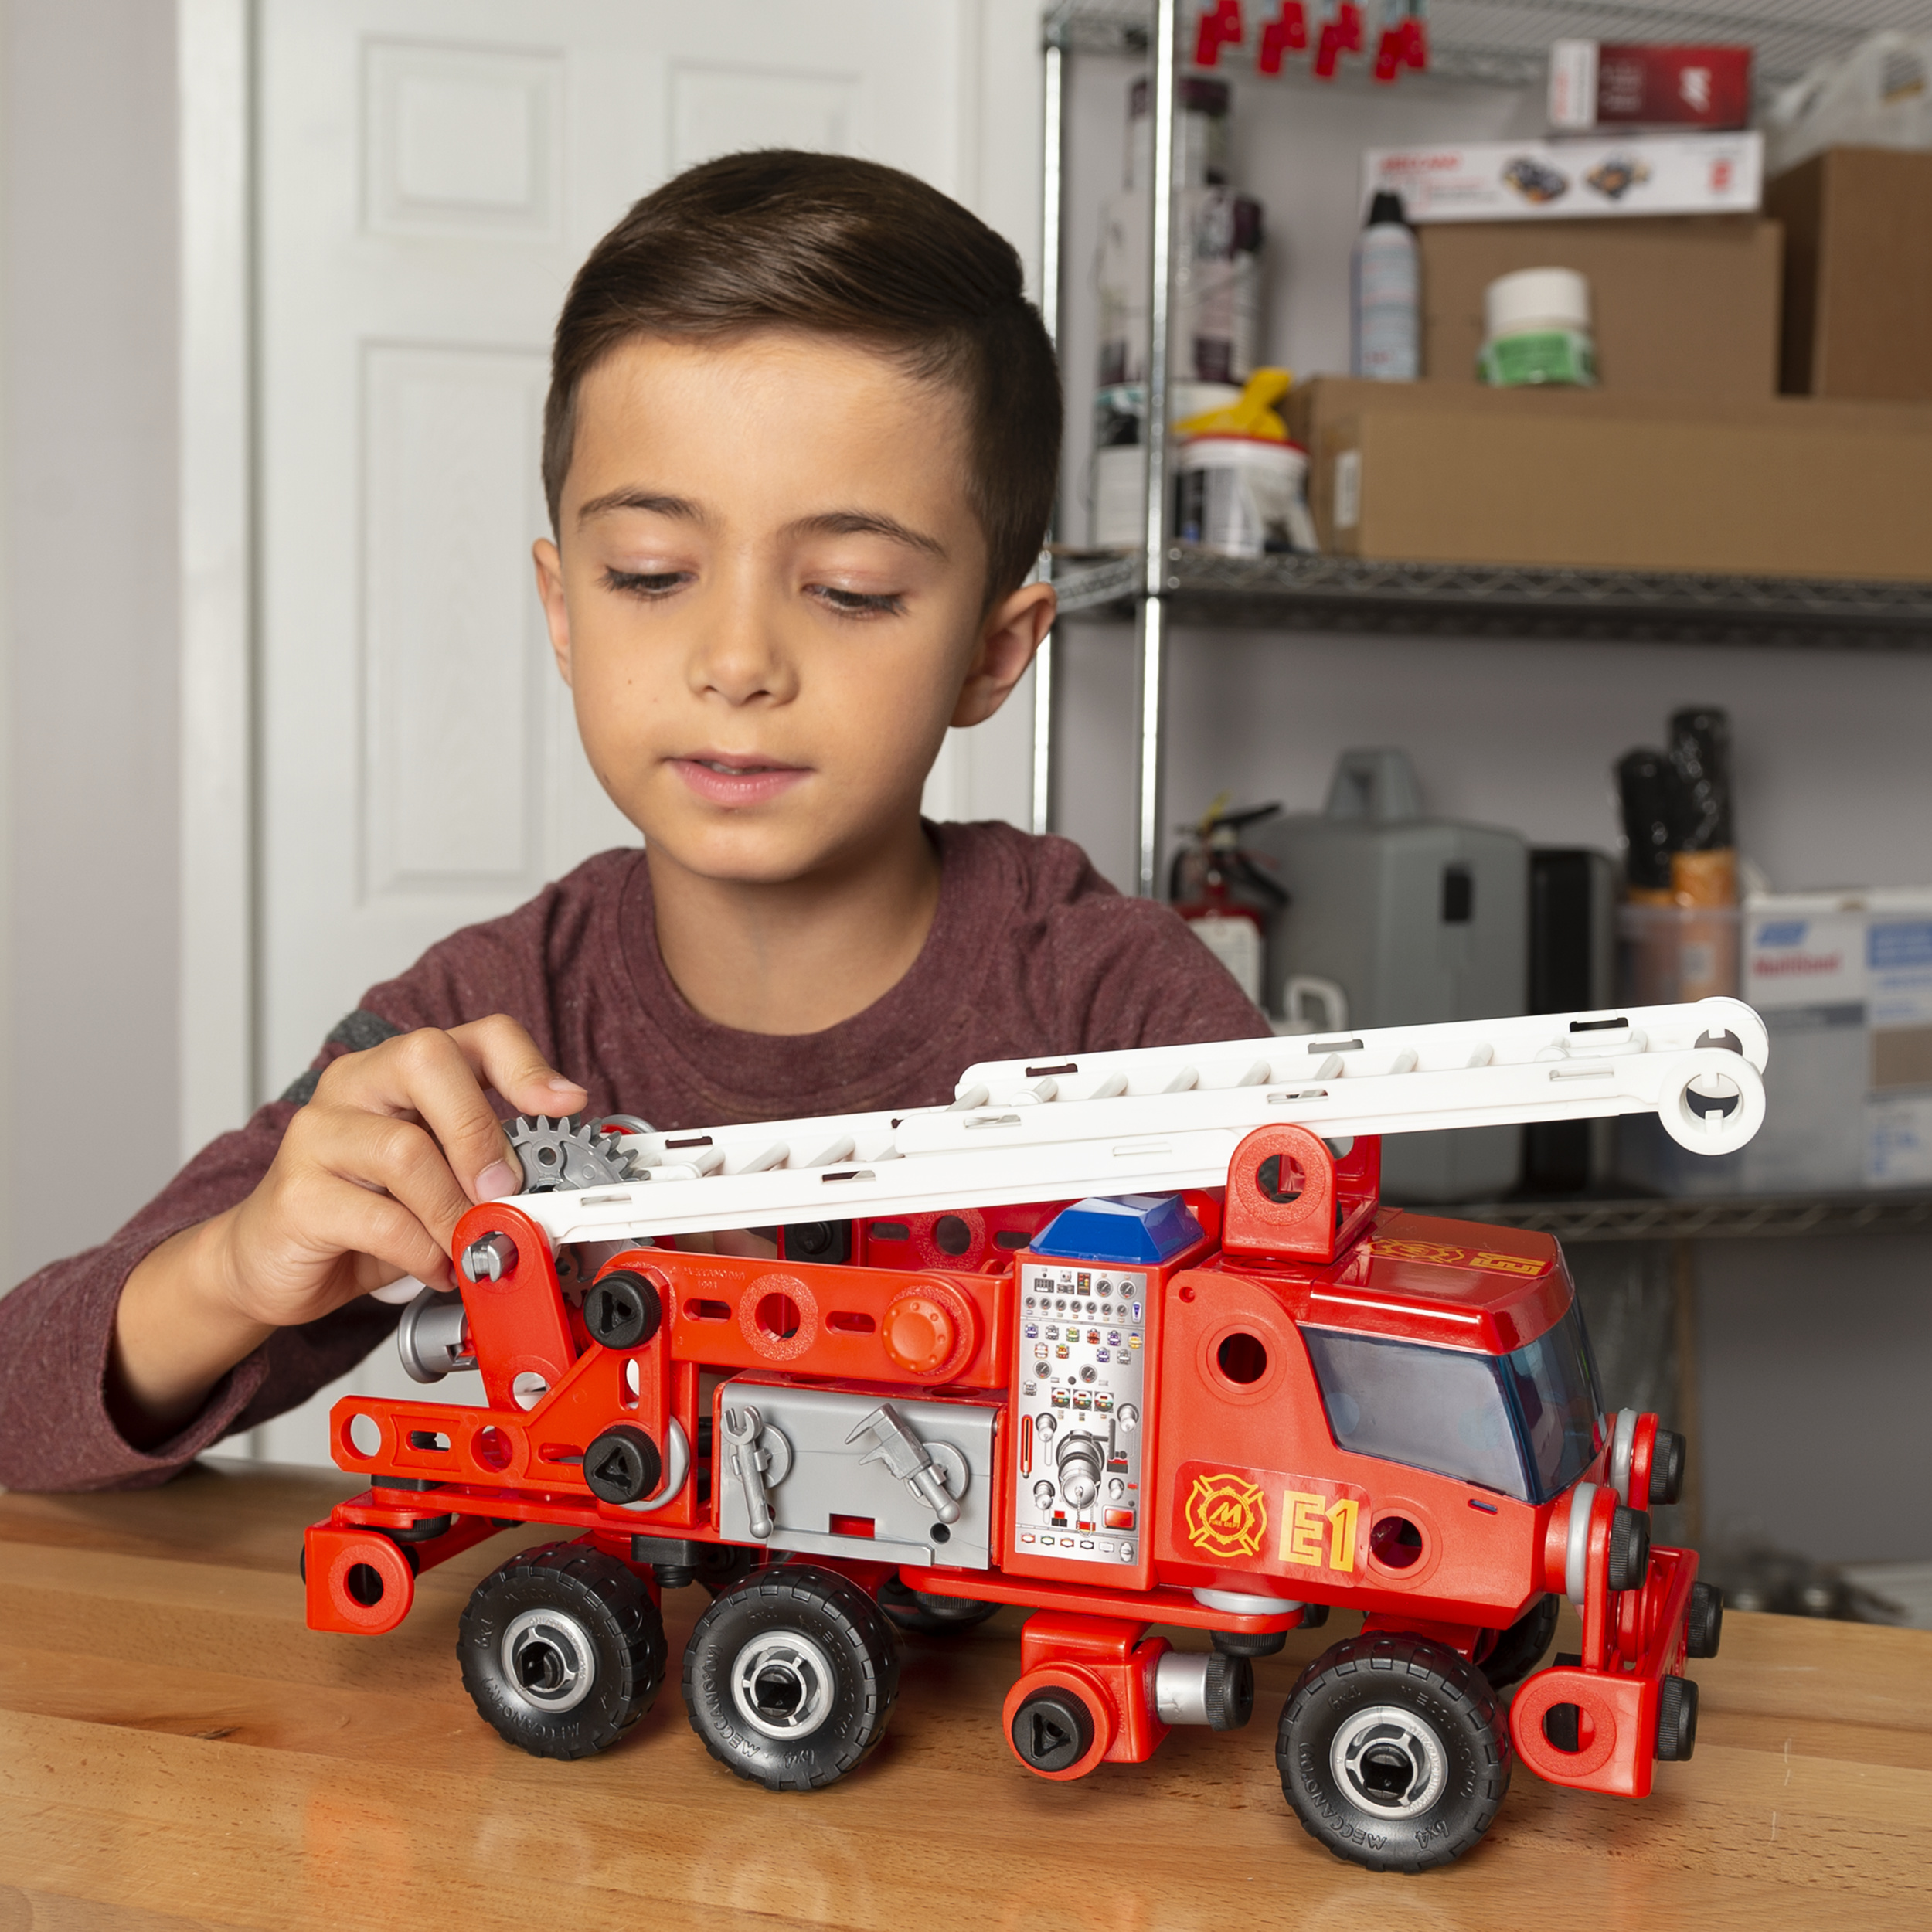 Meccano Junior Rescue Fire Truck with Lights and Sounds Model Building Kit - image 2 of 8